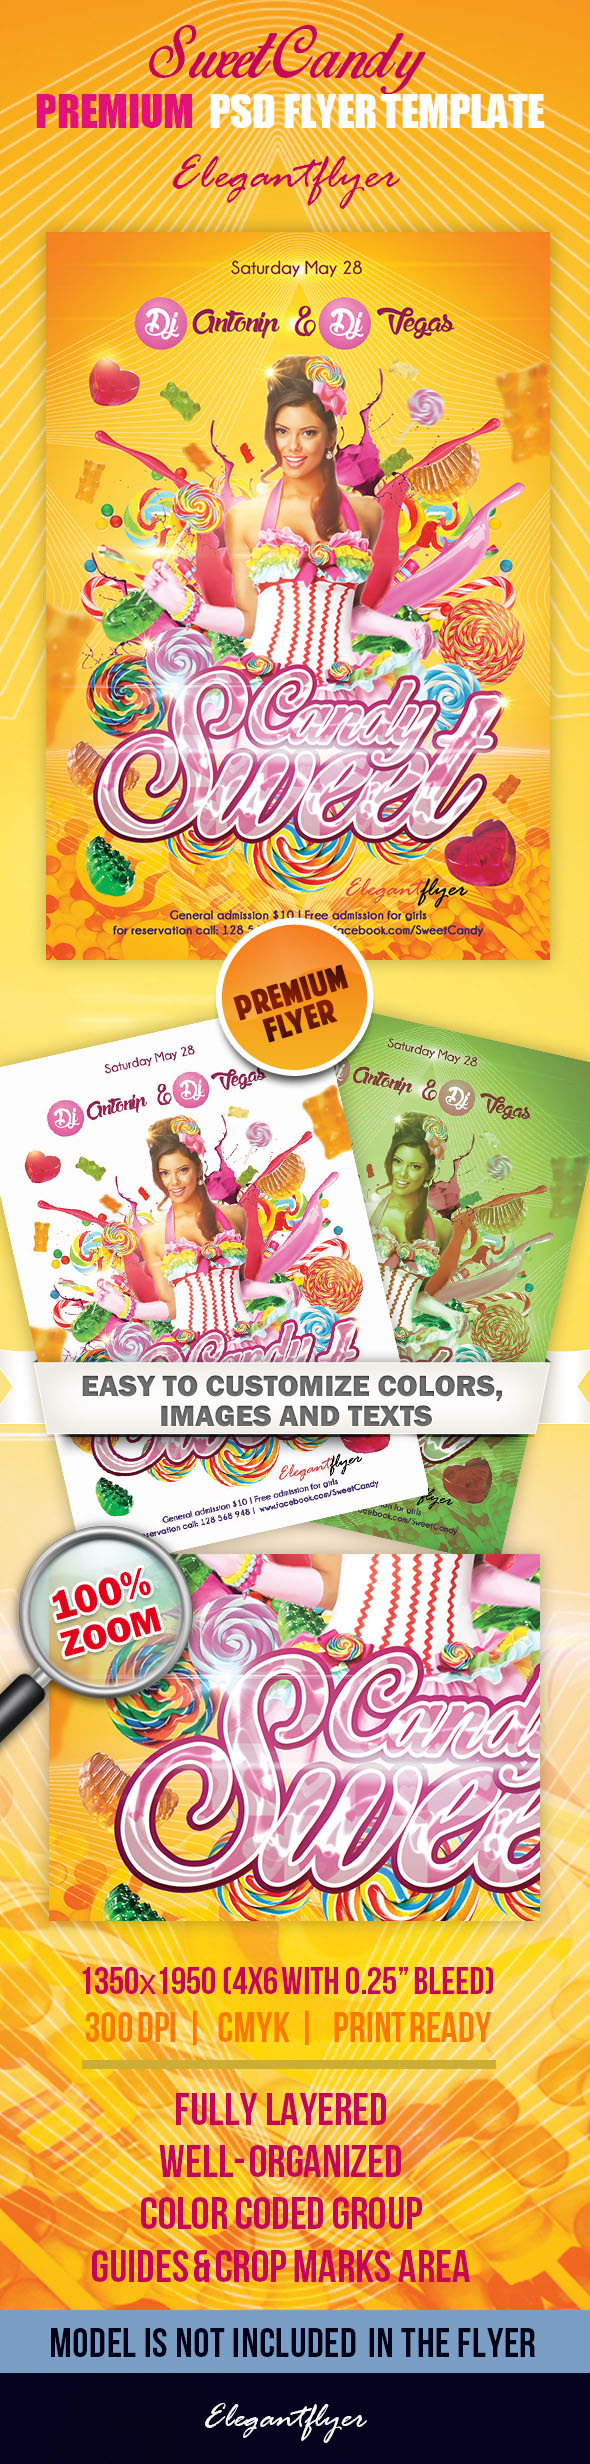 Candy Flyer Template